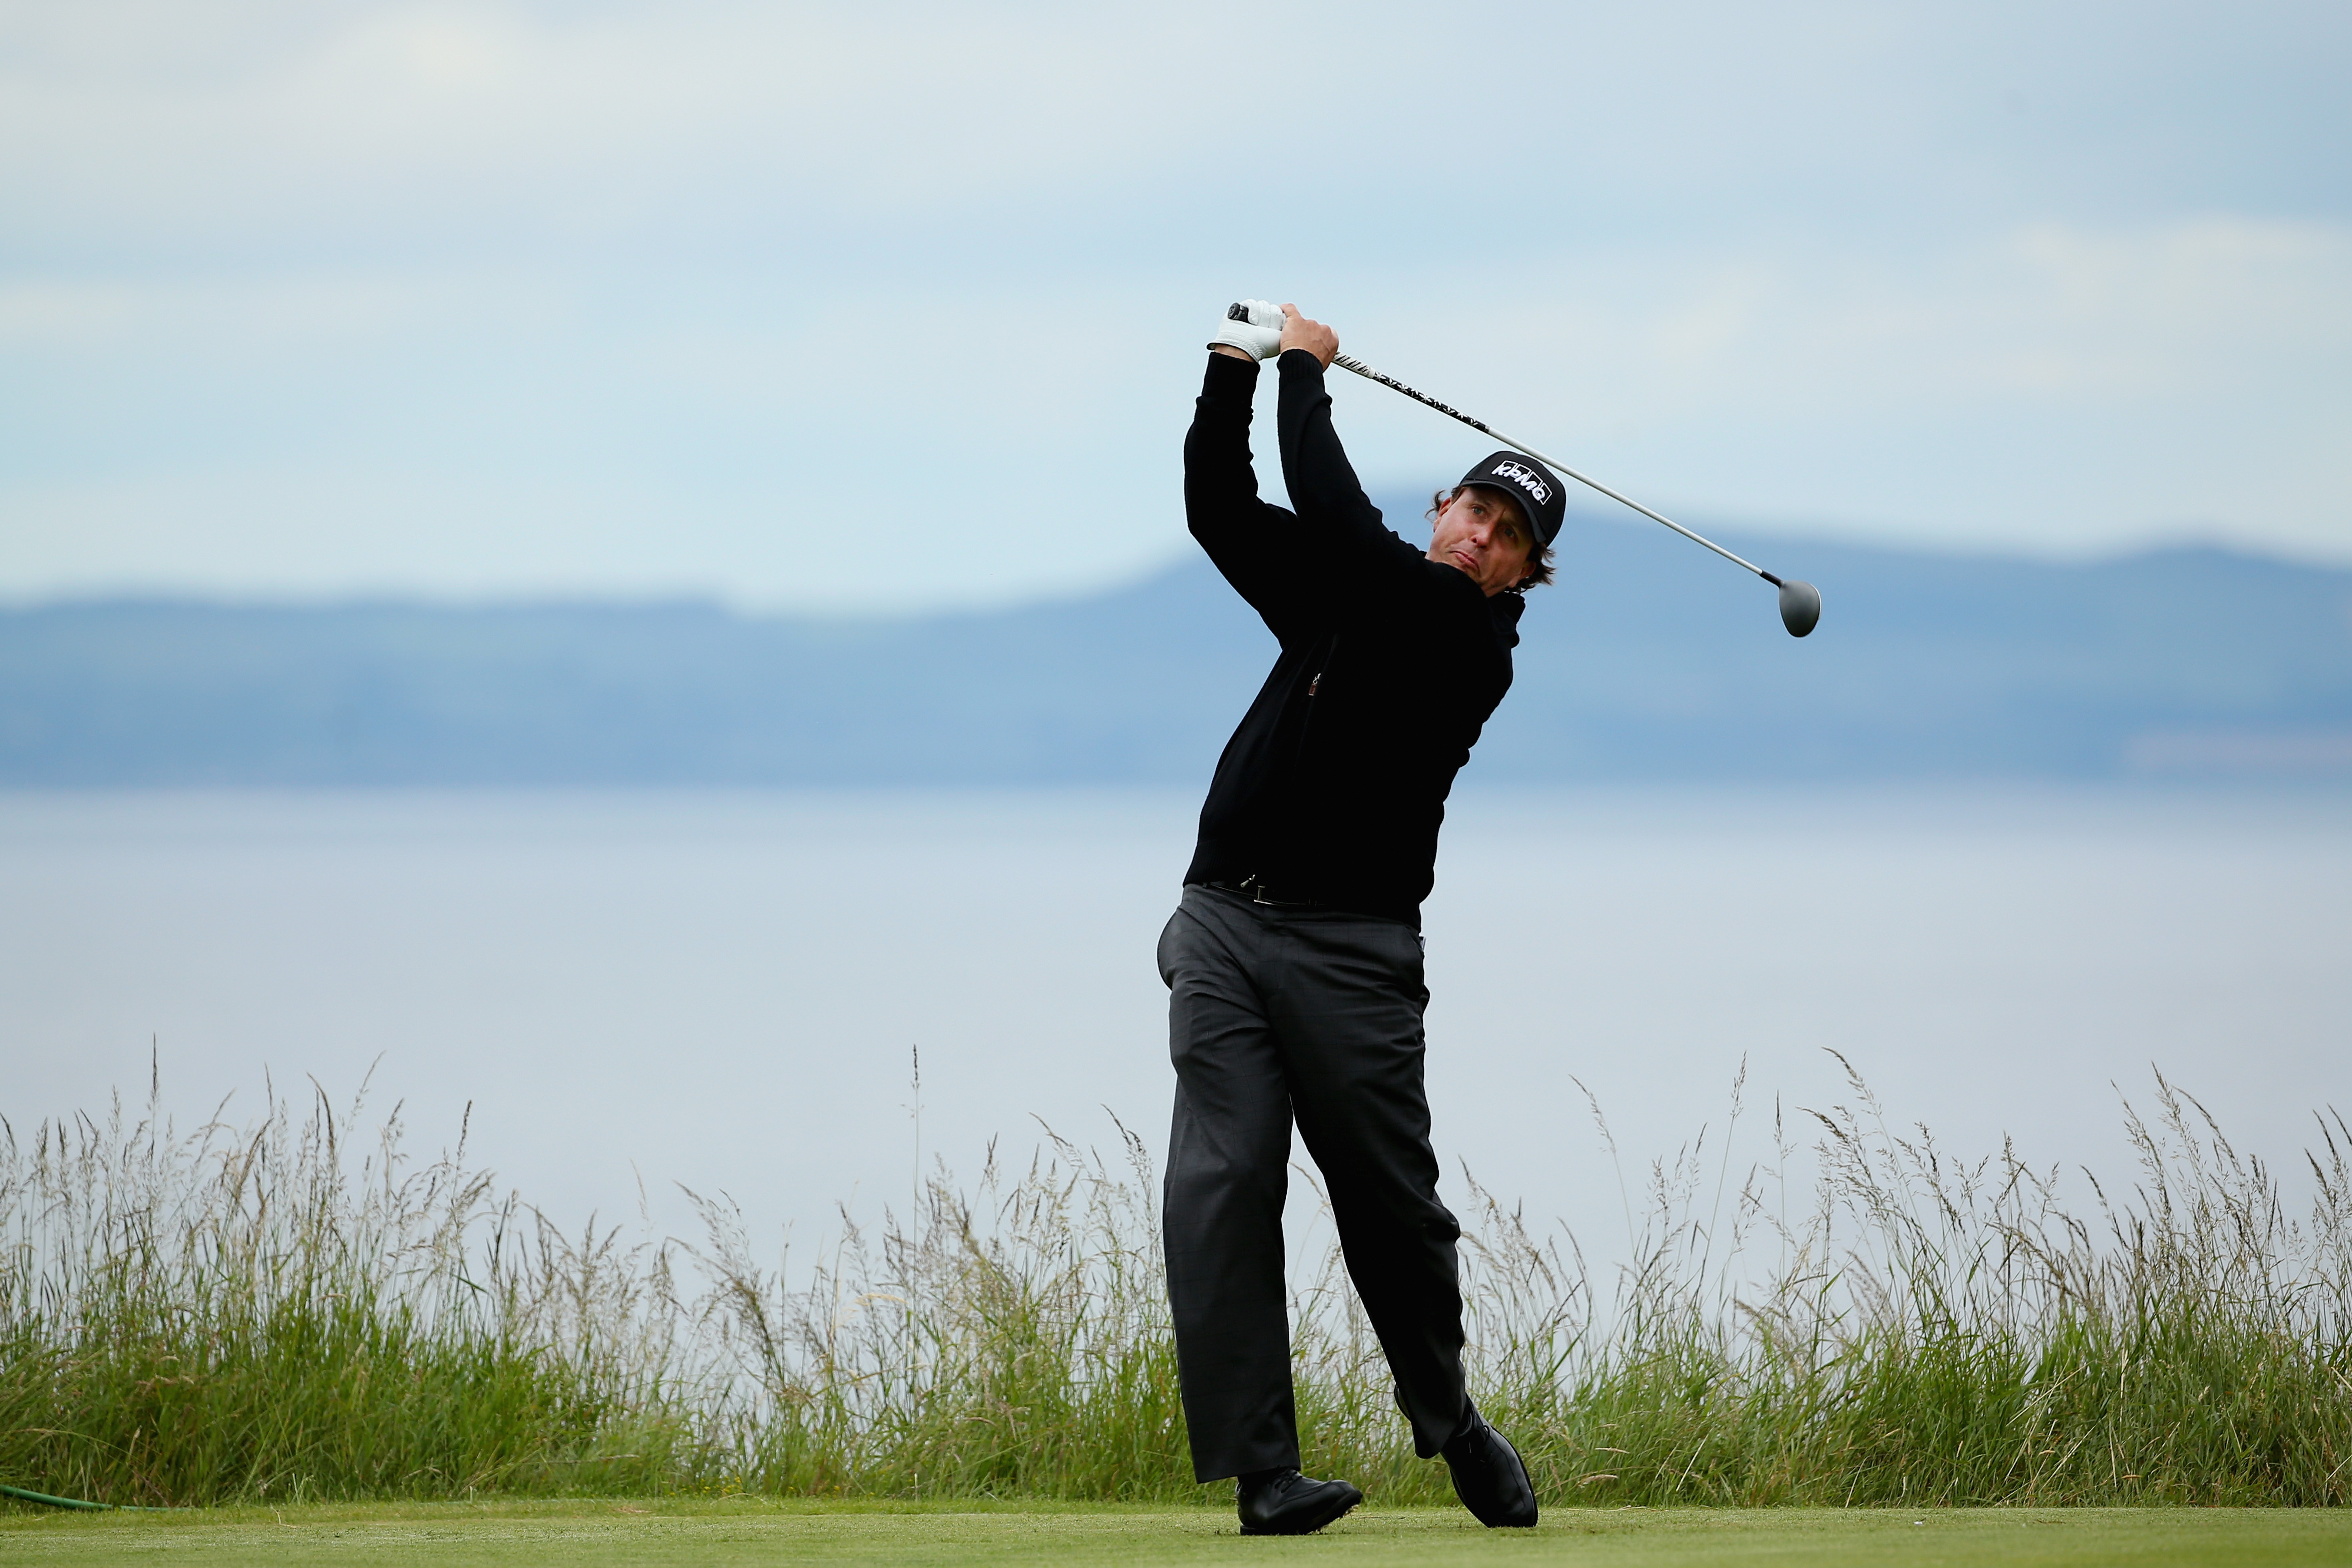 Phil Mickelson plays the Scottish Open at Gullane this week (Photo: Getty Images)